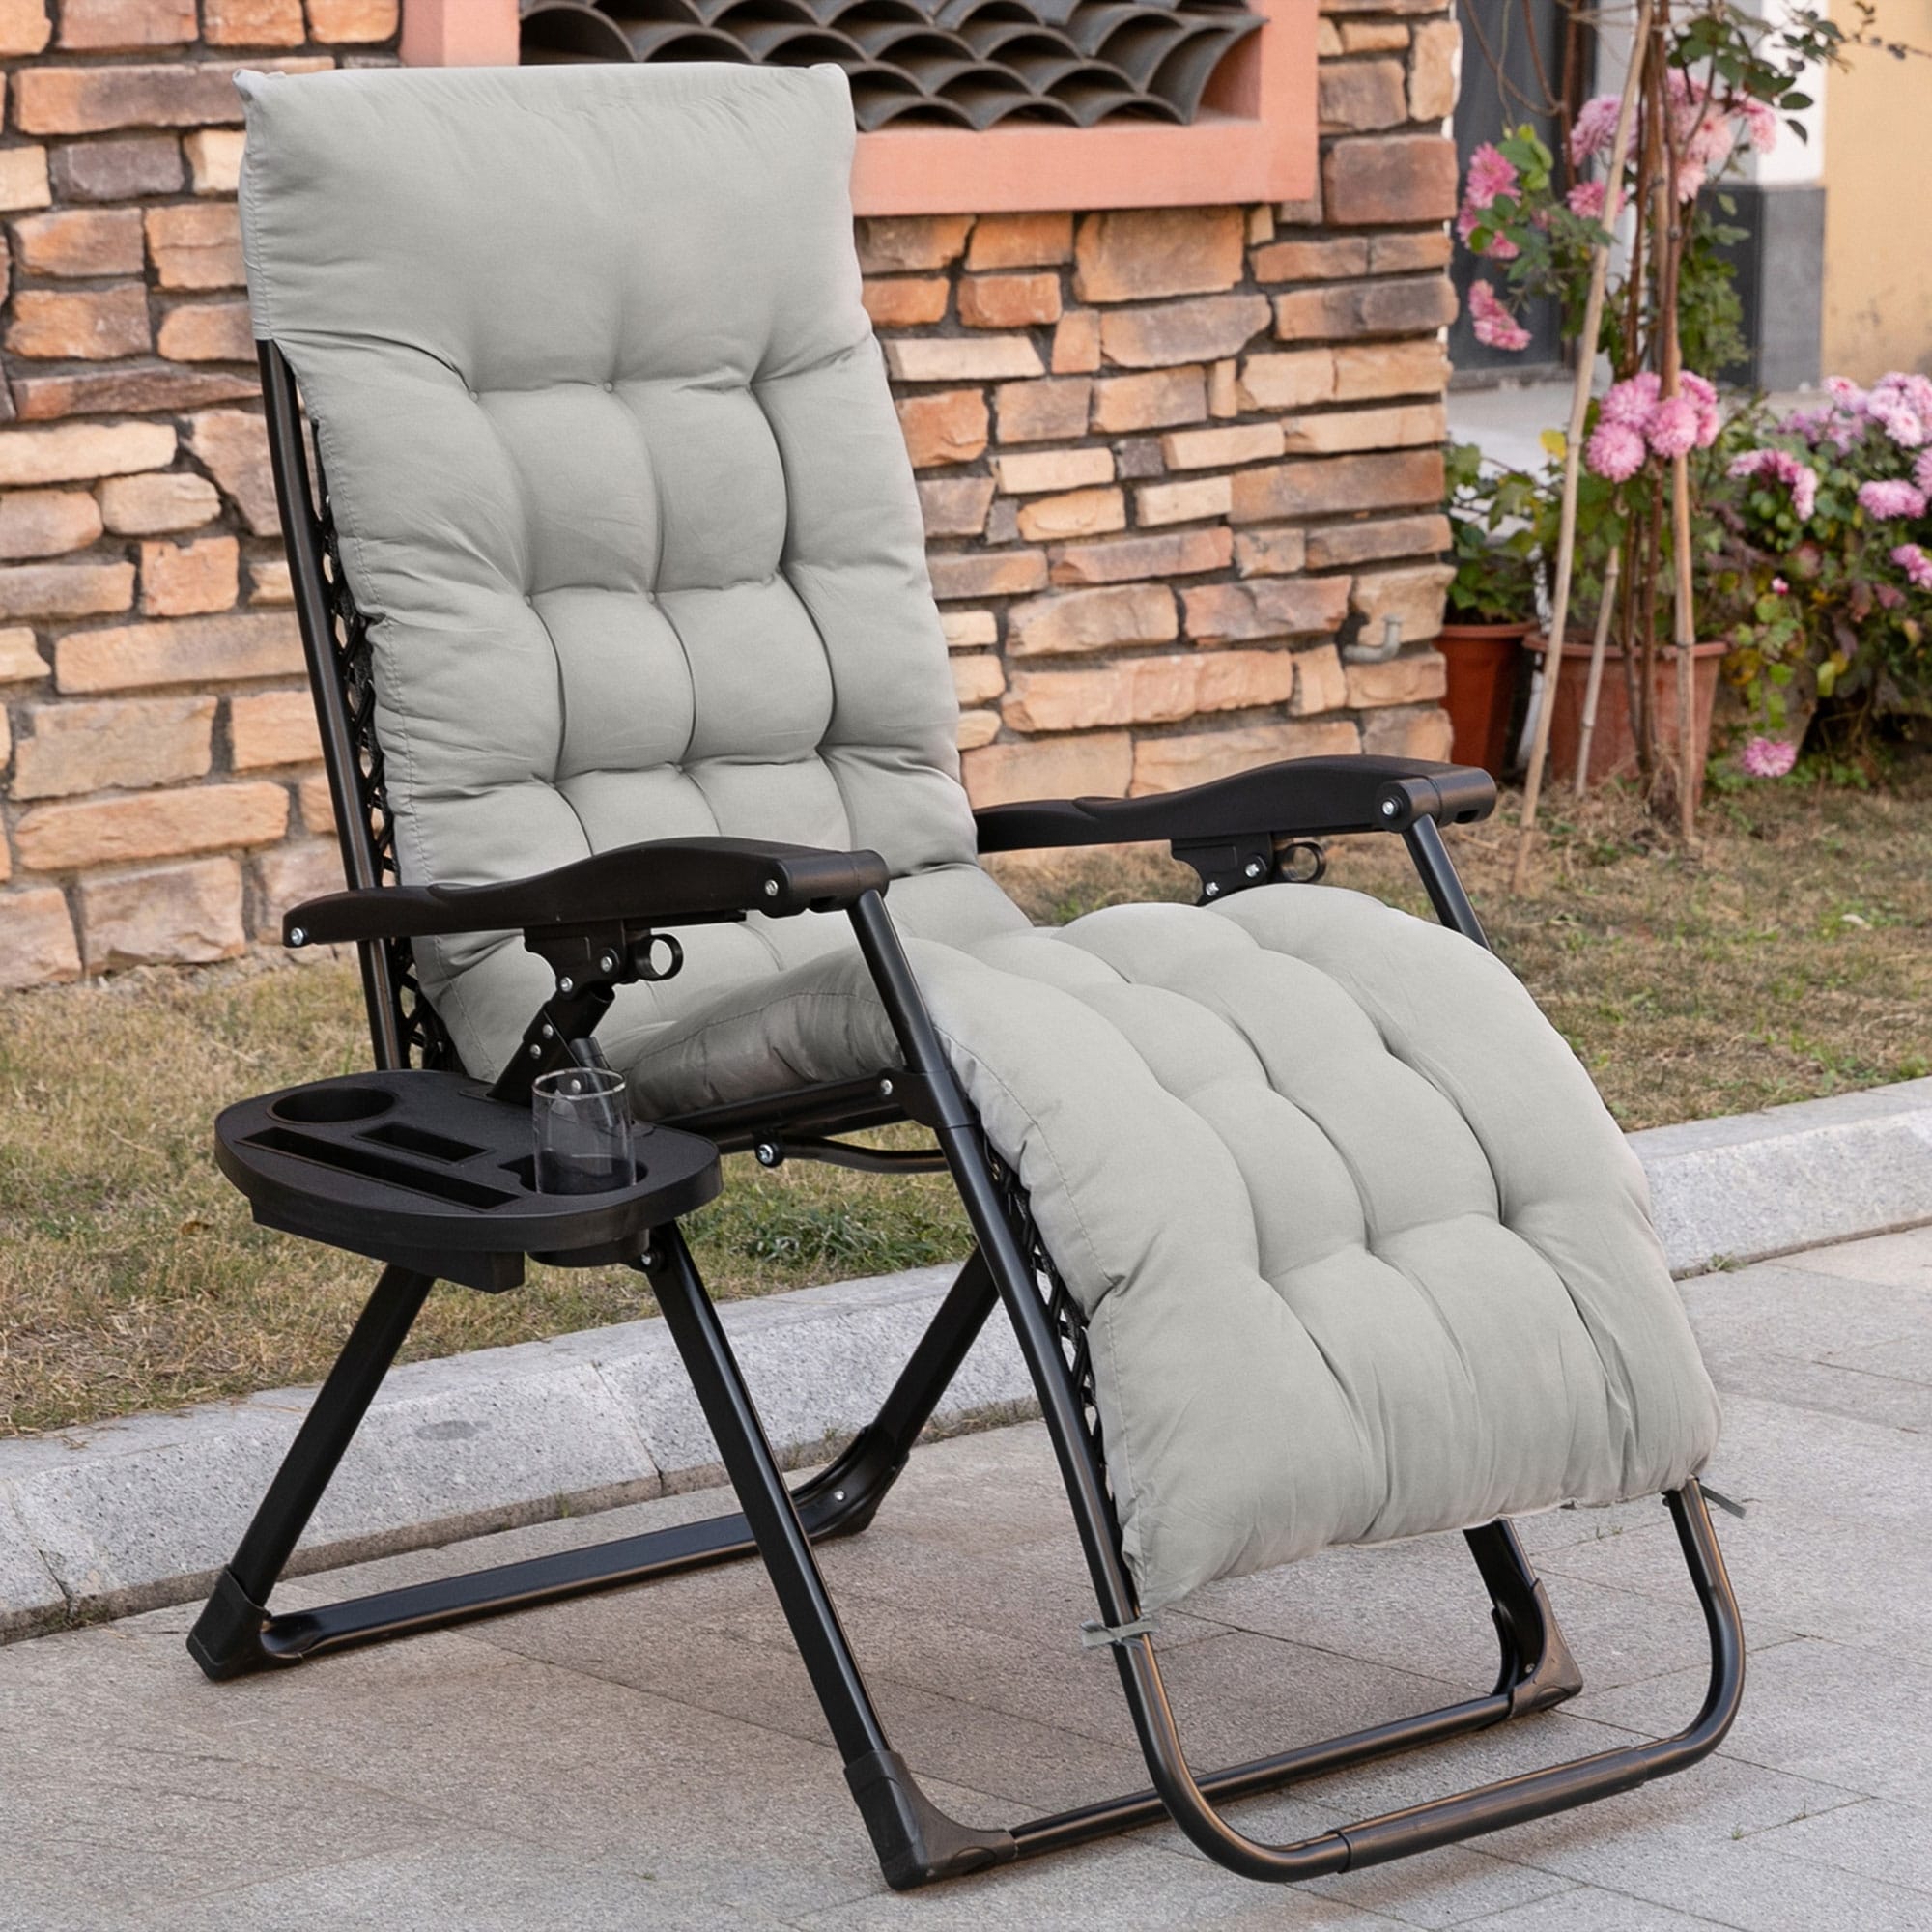 Outsunny Padded Zero Gravity Chairs  Folding Recliner Chair  Patio Lounger With Cup Holder  Adjustable Backrest